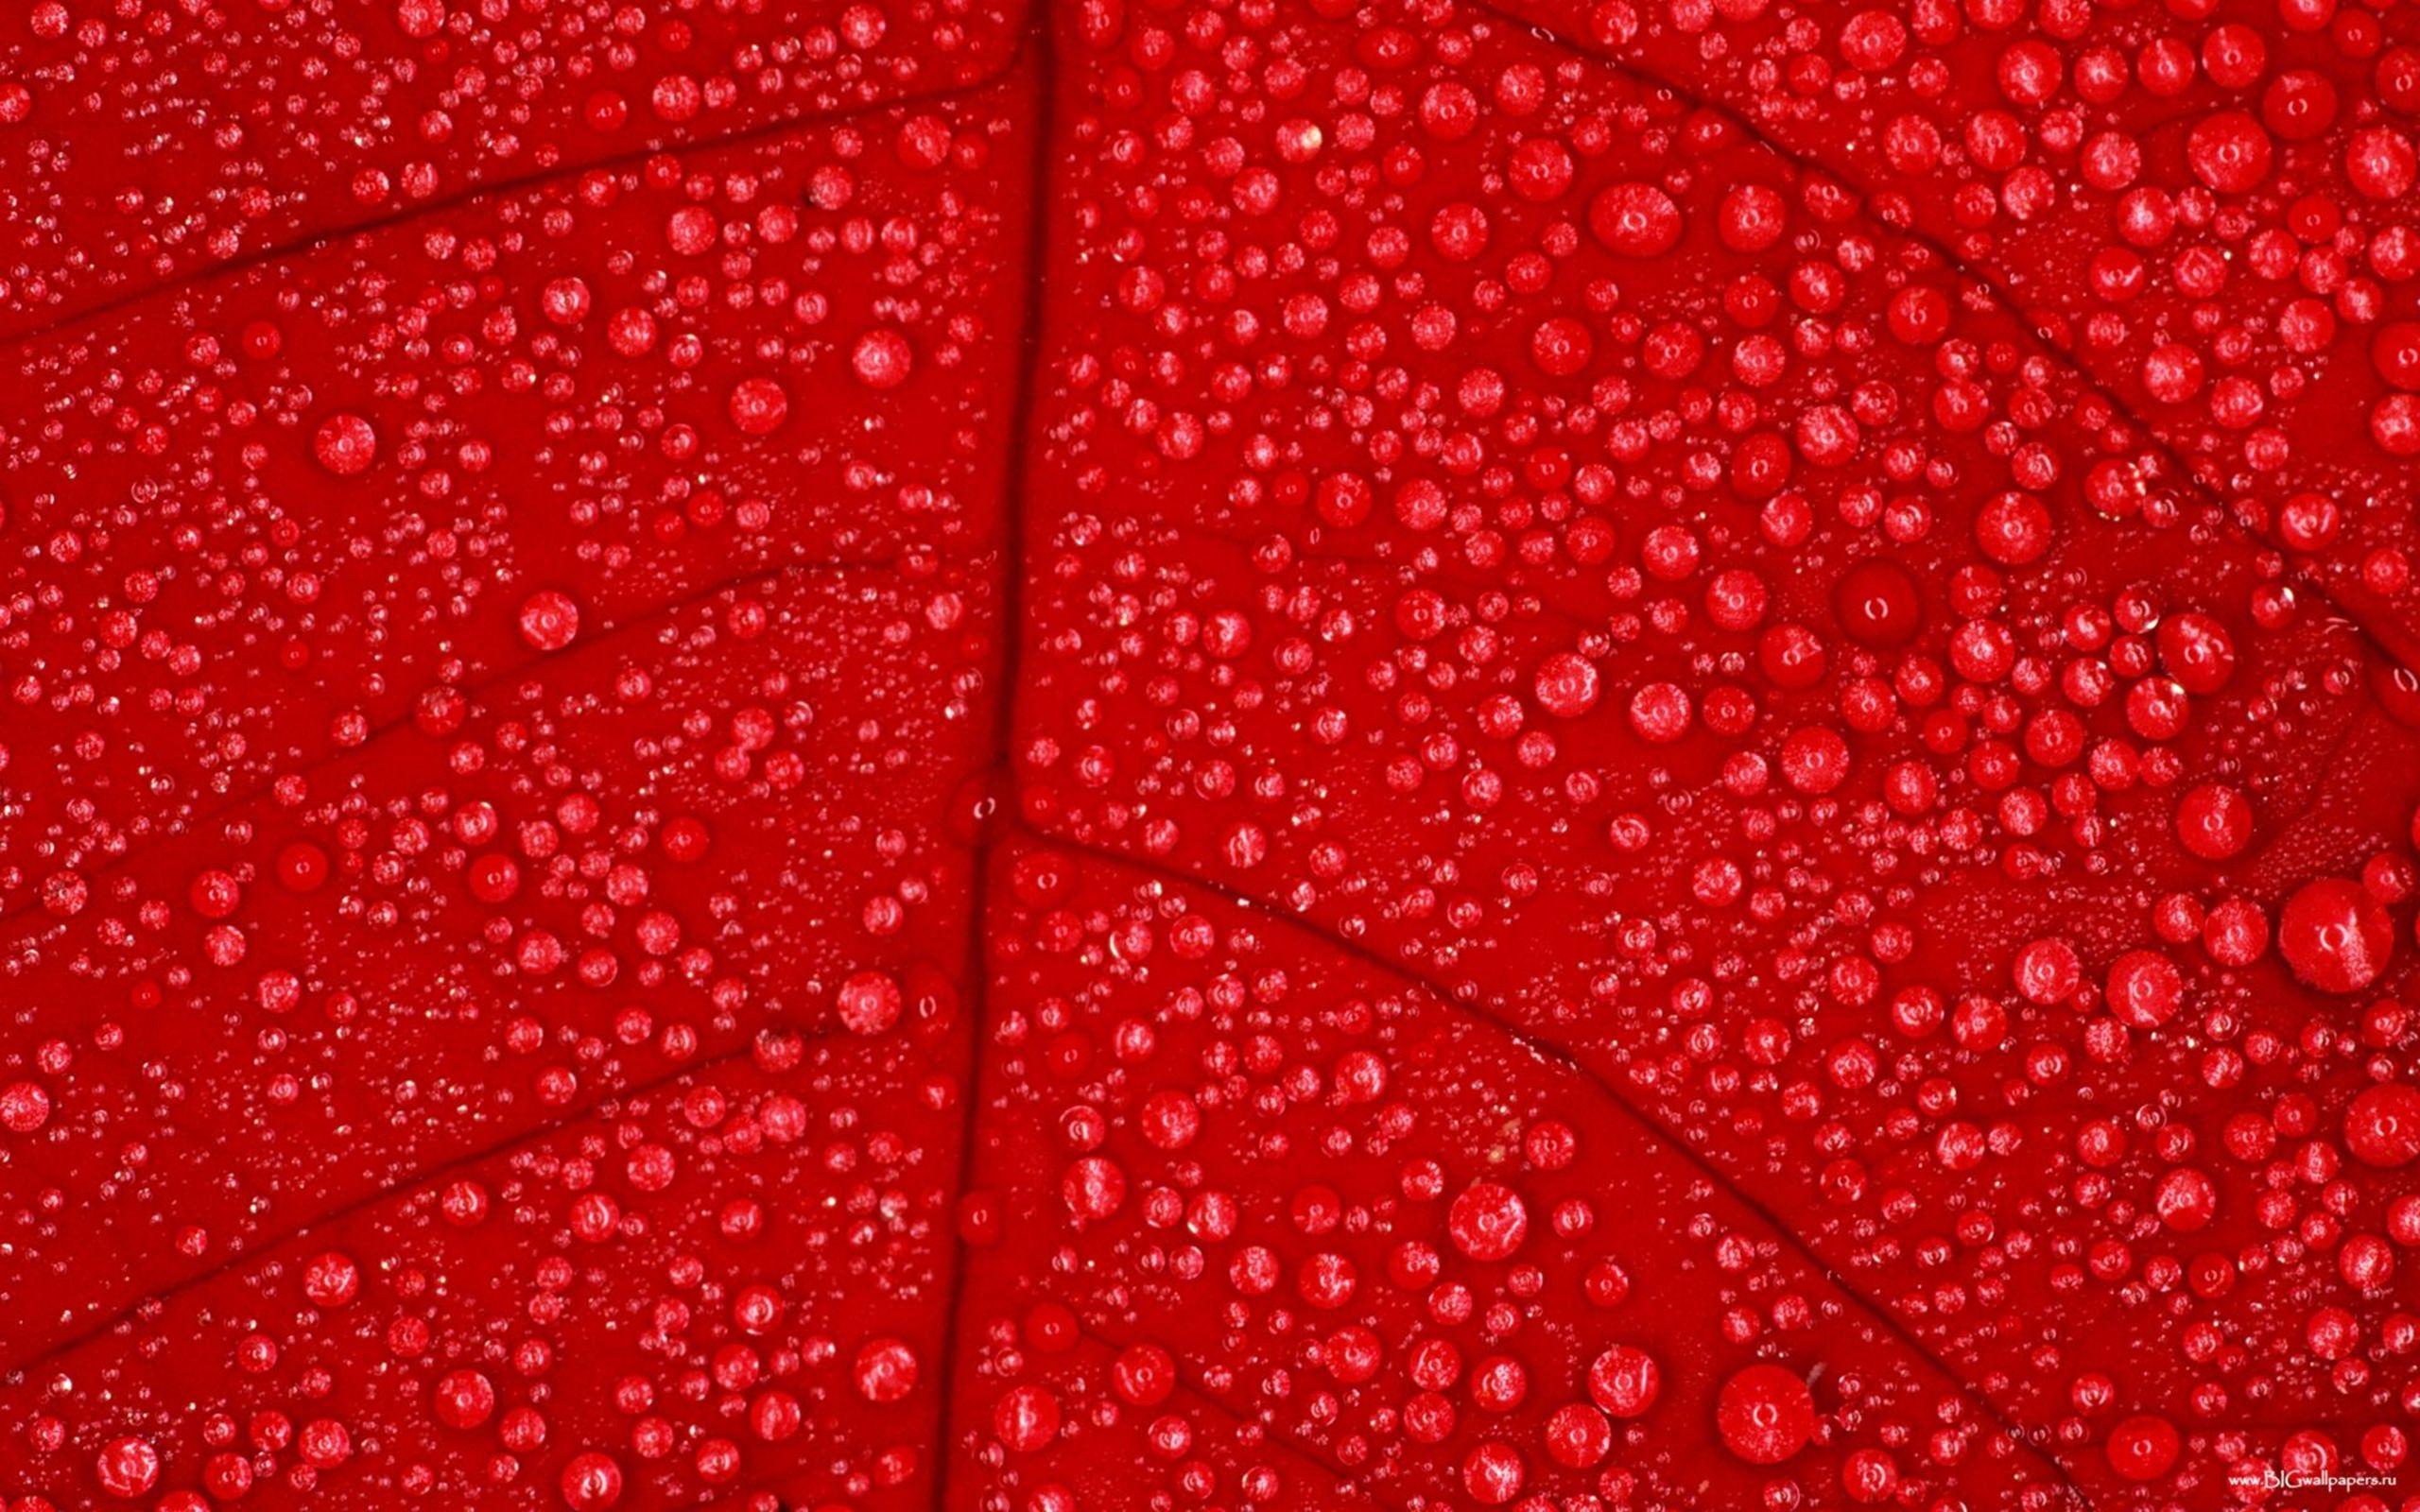 Red Leaf With Water Drops Wallpaper, Wallpaper13.com